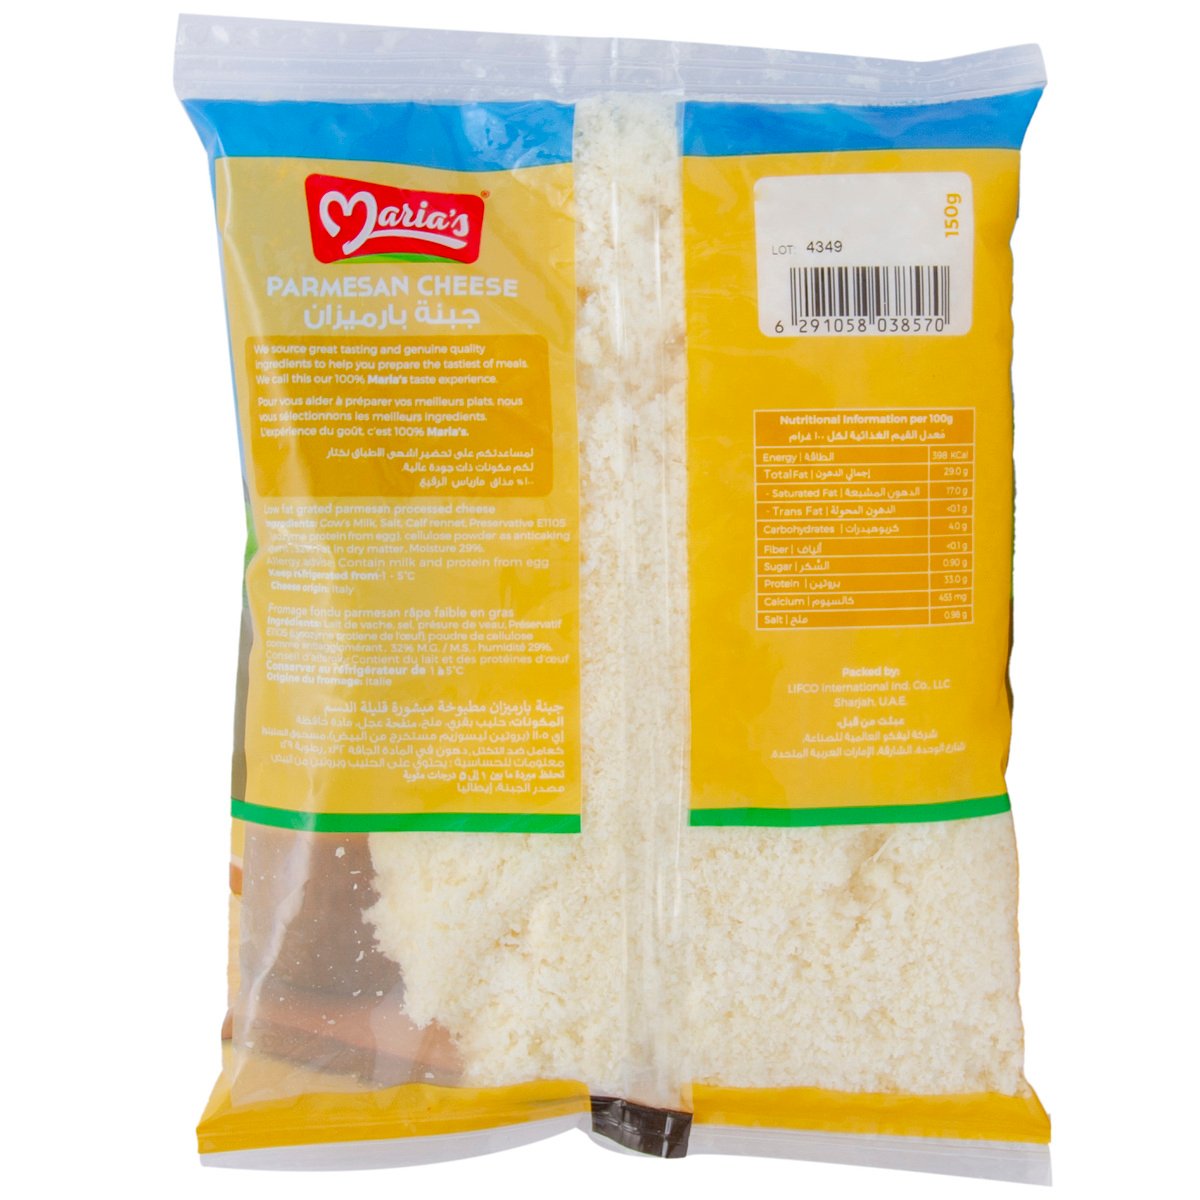 Maria's Parmesan Cheese Grated 150 g